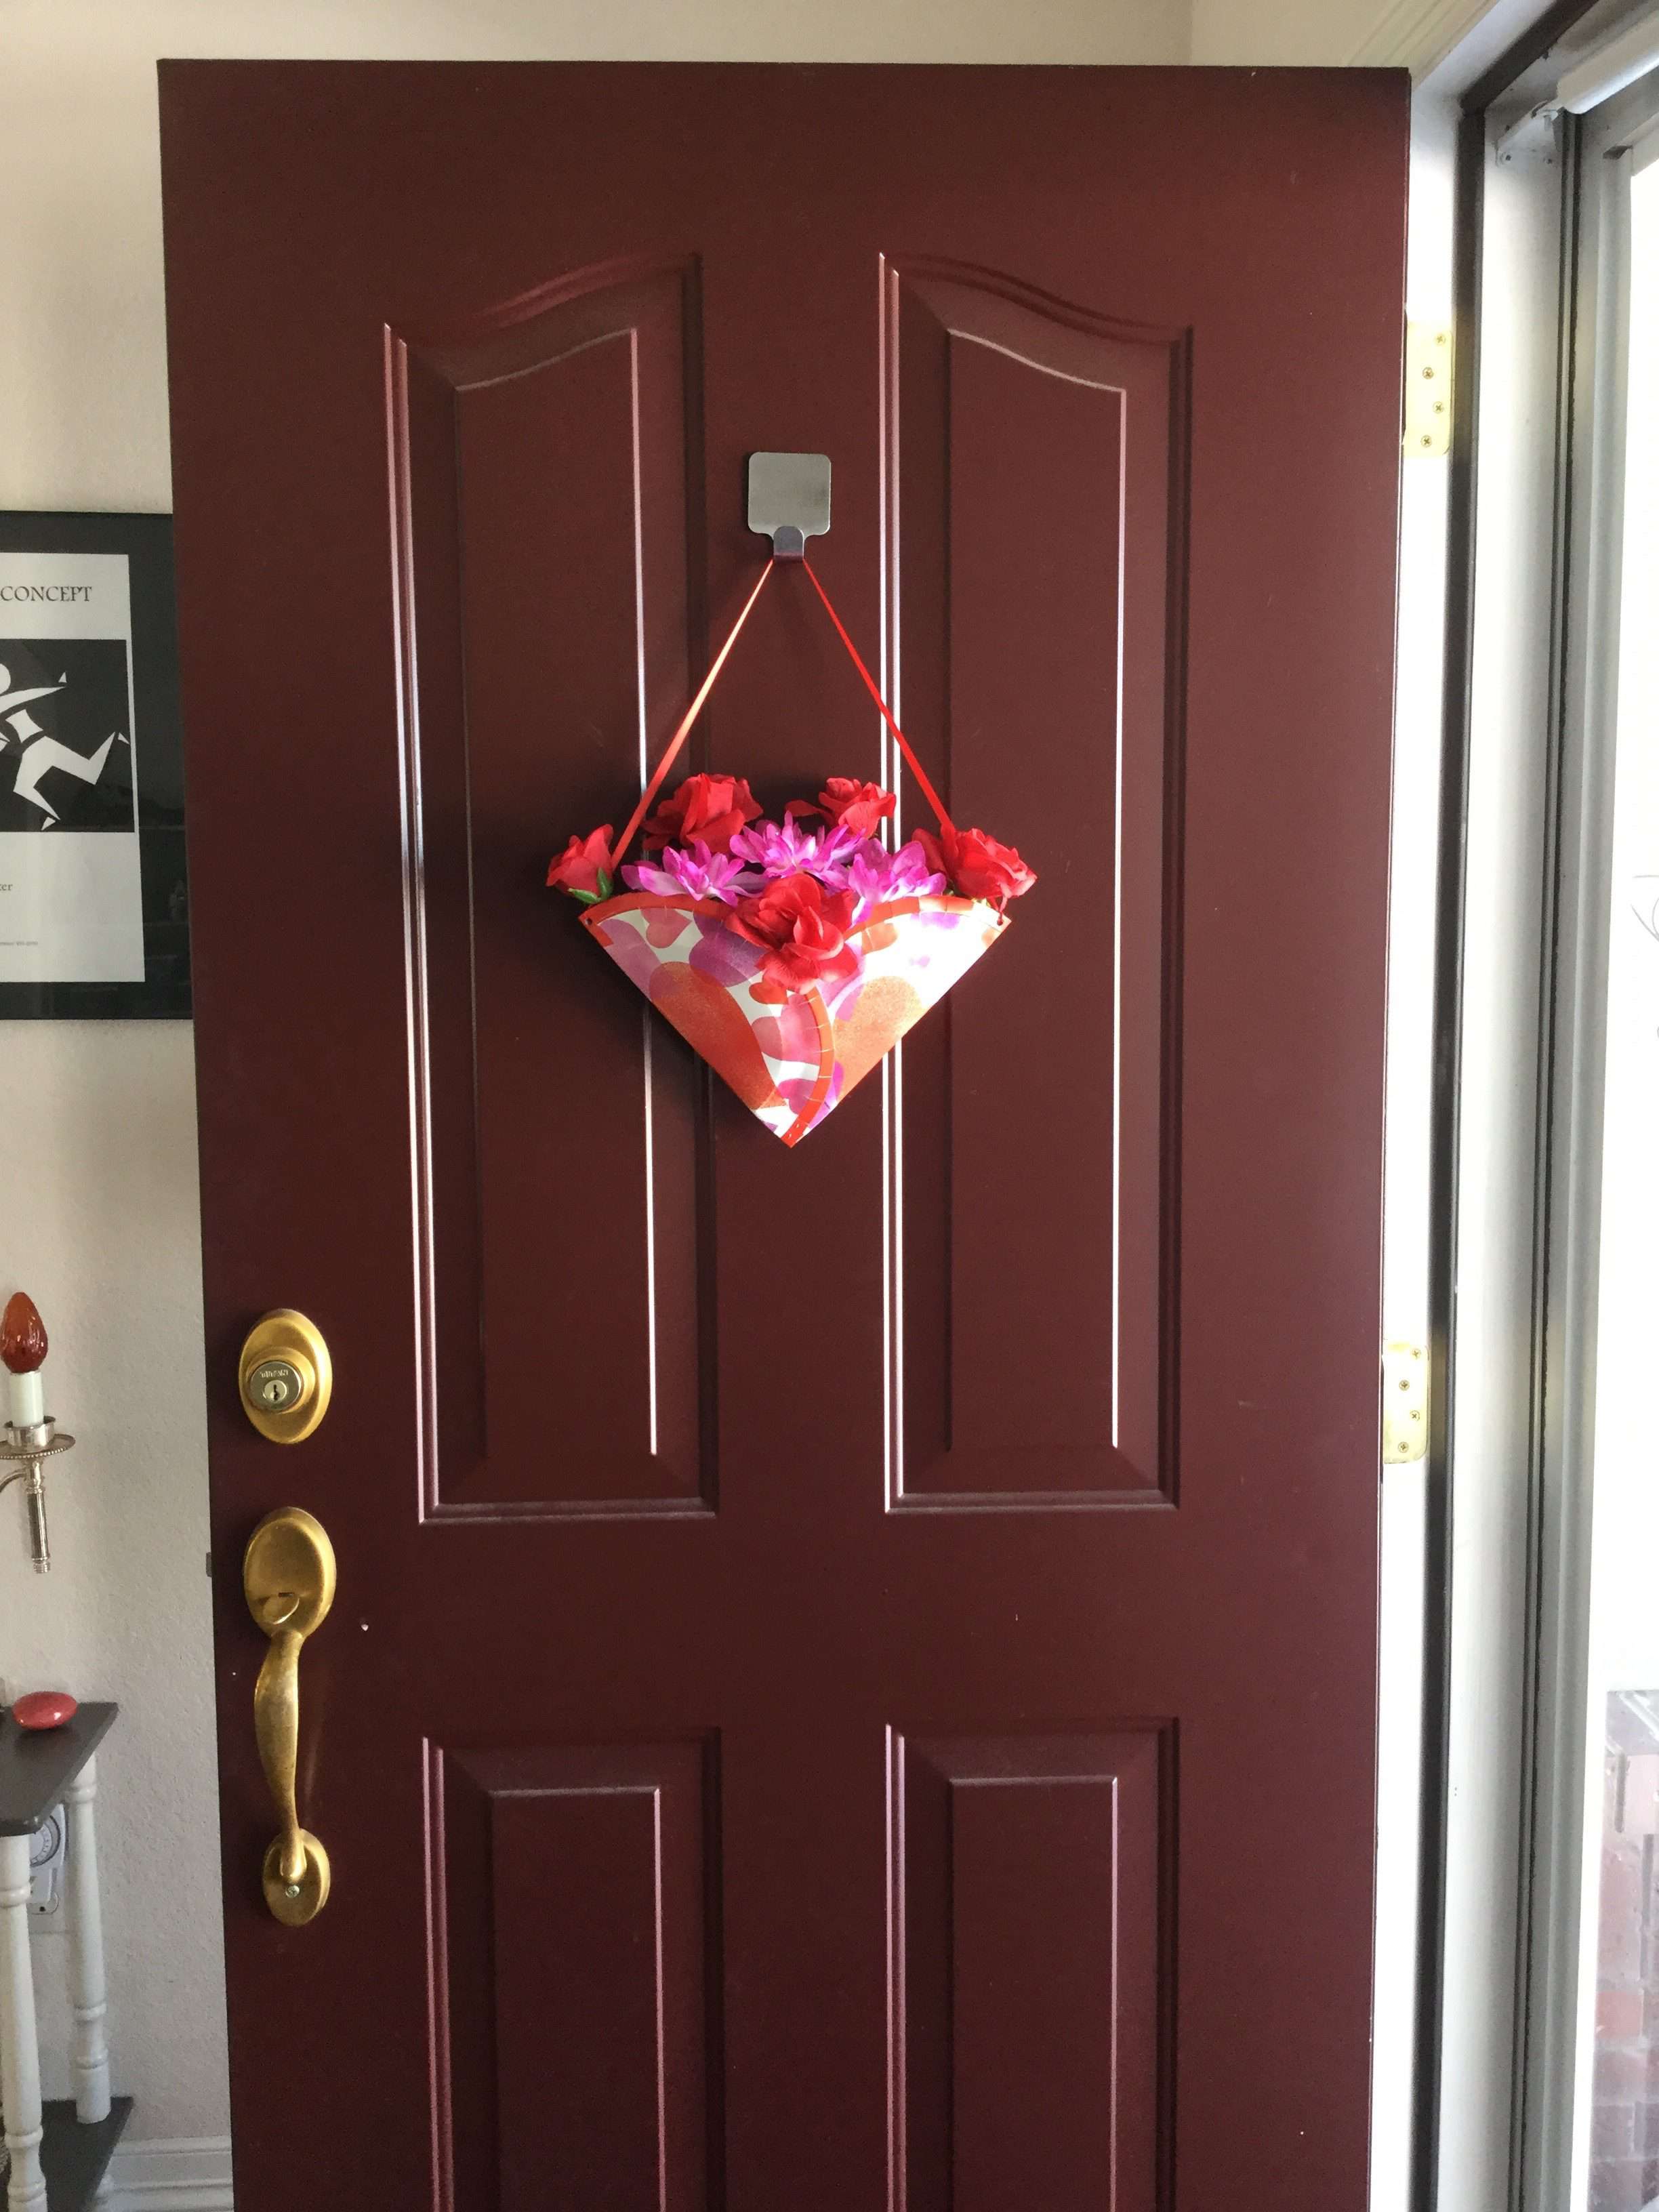 Do you want a unique Dollar Tree Valentine wreath?  I made this fun idea for my front door and it can be adjusted for any holiday or season!